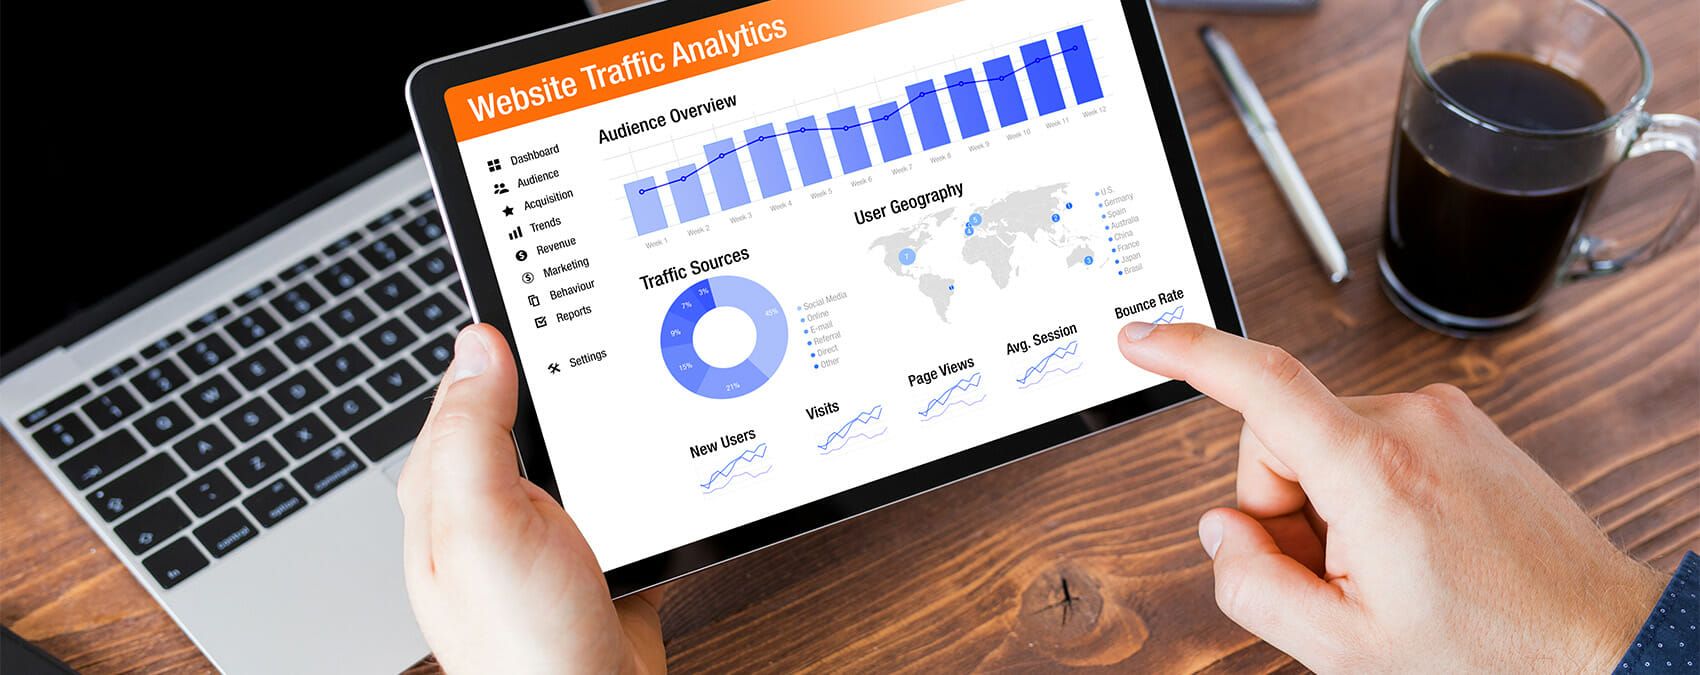 A person holds a tablet showing an analytics dashboard titled 'Website Traffic Analytics' comprised of various charts